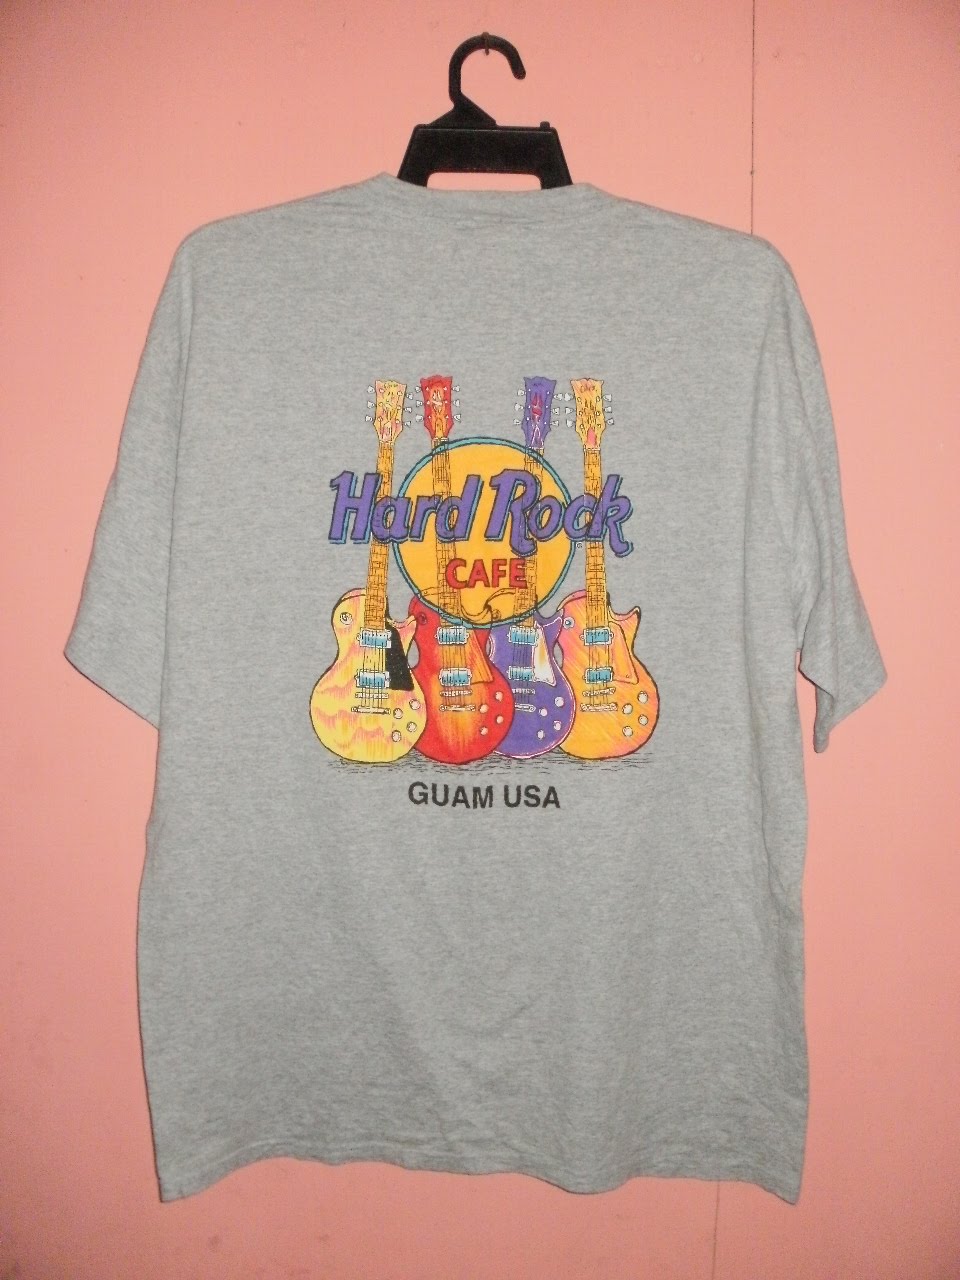 Old is Gold: T-Shirt Hard Rock Cafe Guam USA